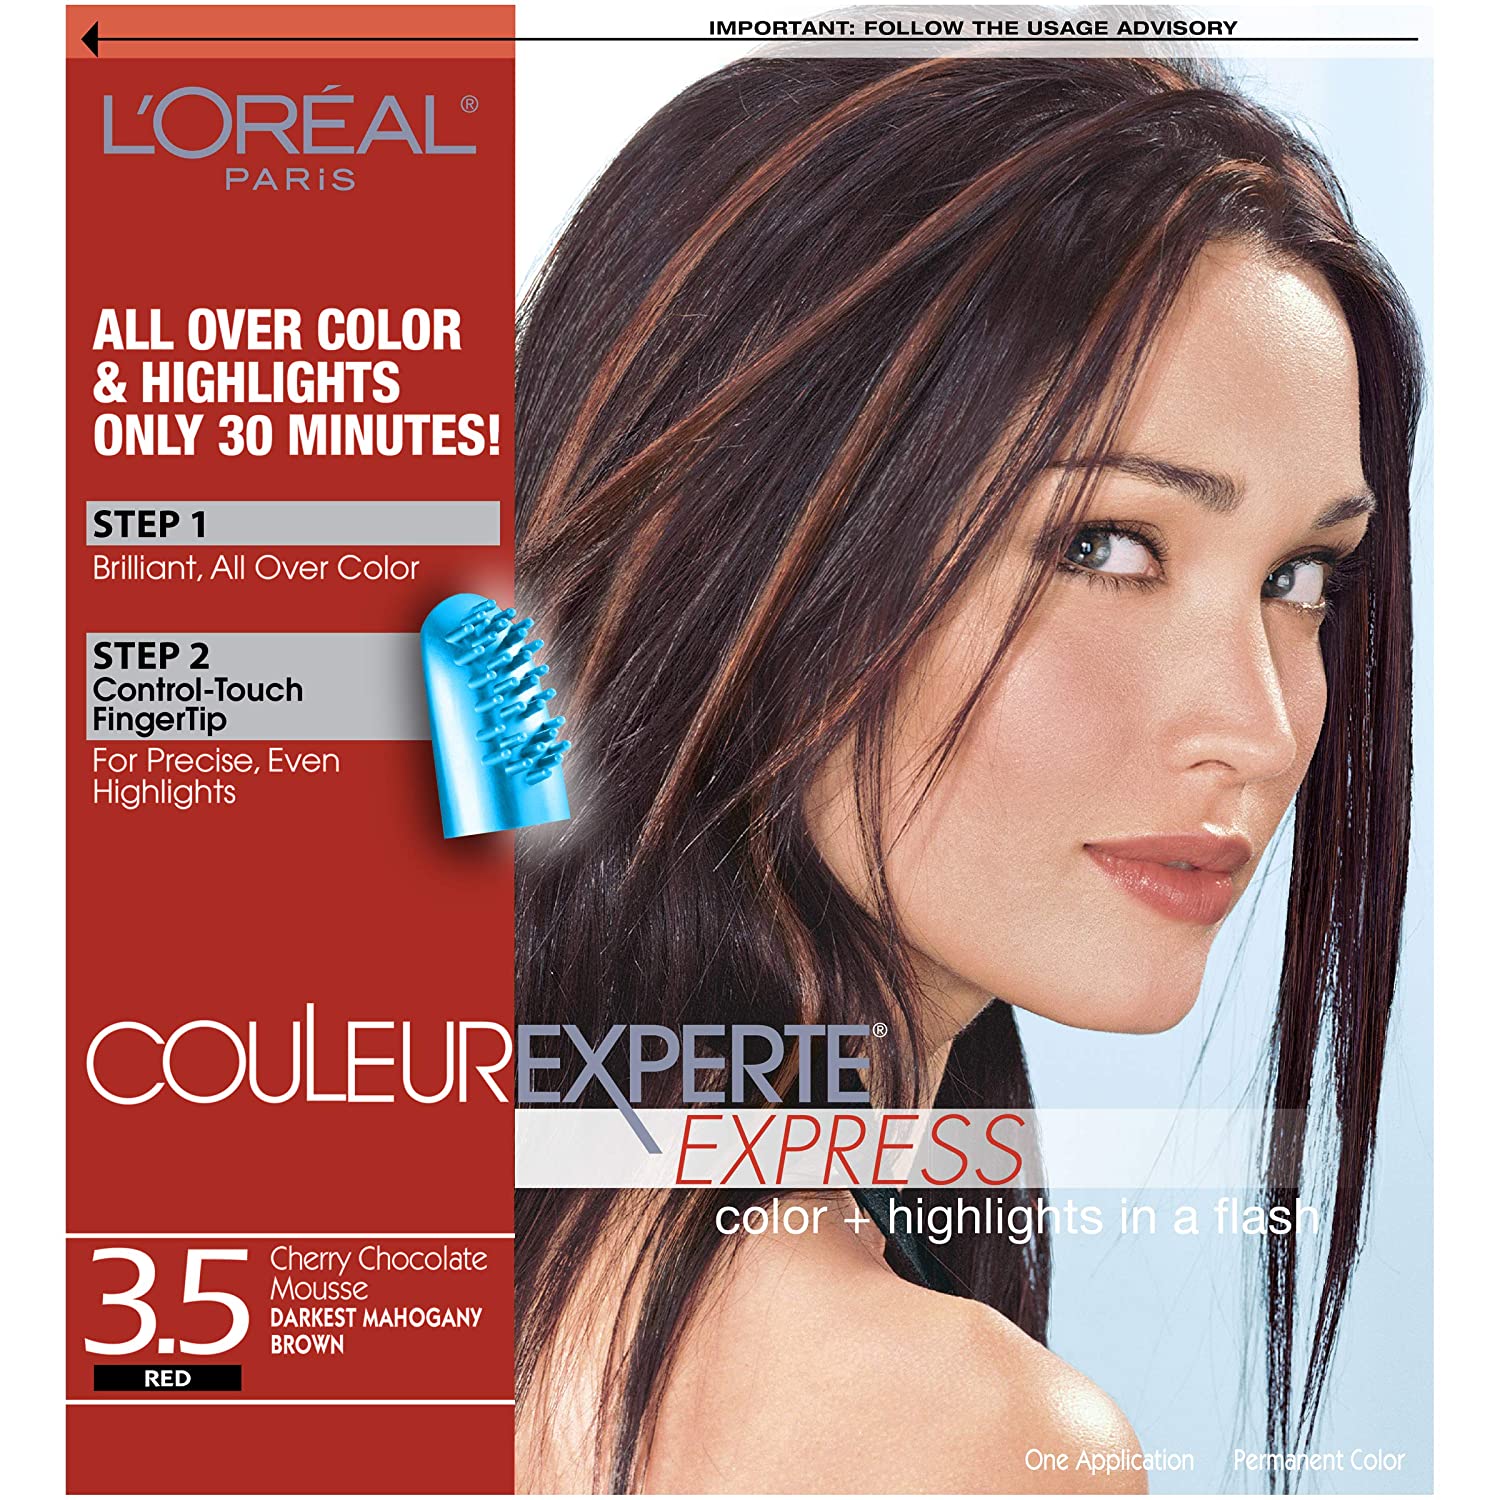 L'Oreal Paris Couleur Experte 2-Step Home Hair Color and Highlights Kit - Chocolate Mousse